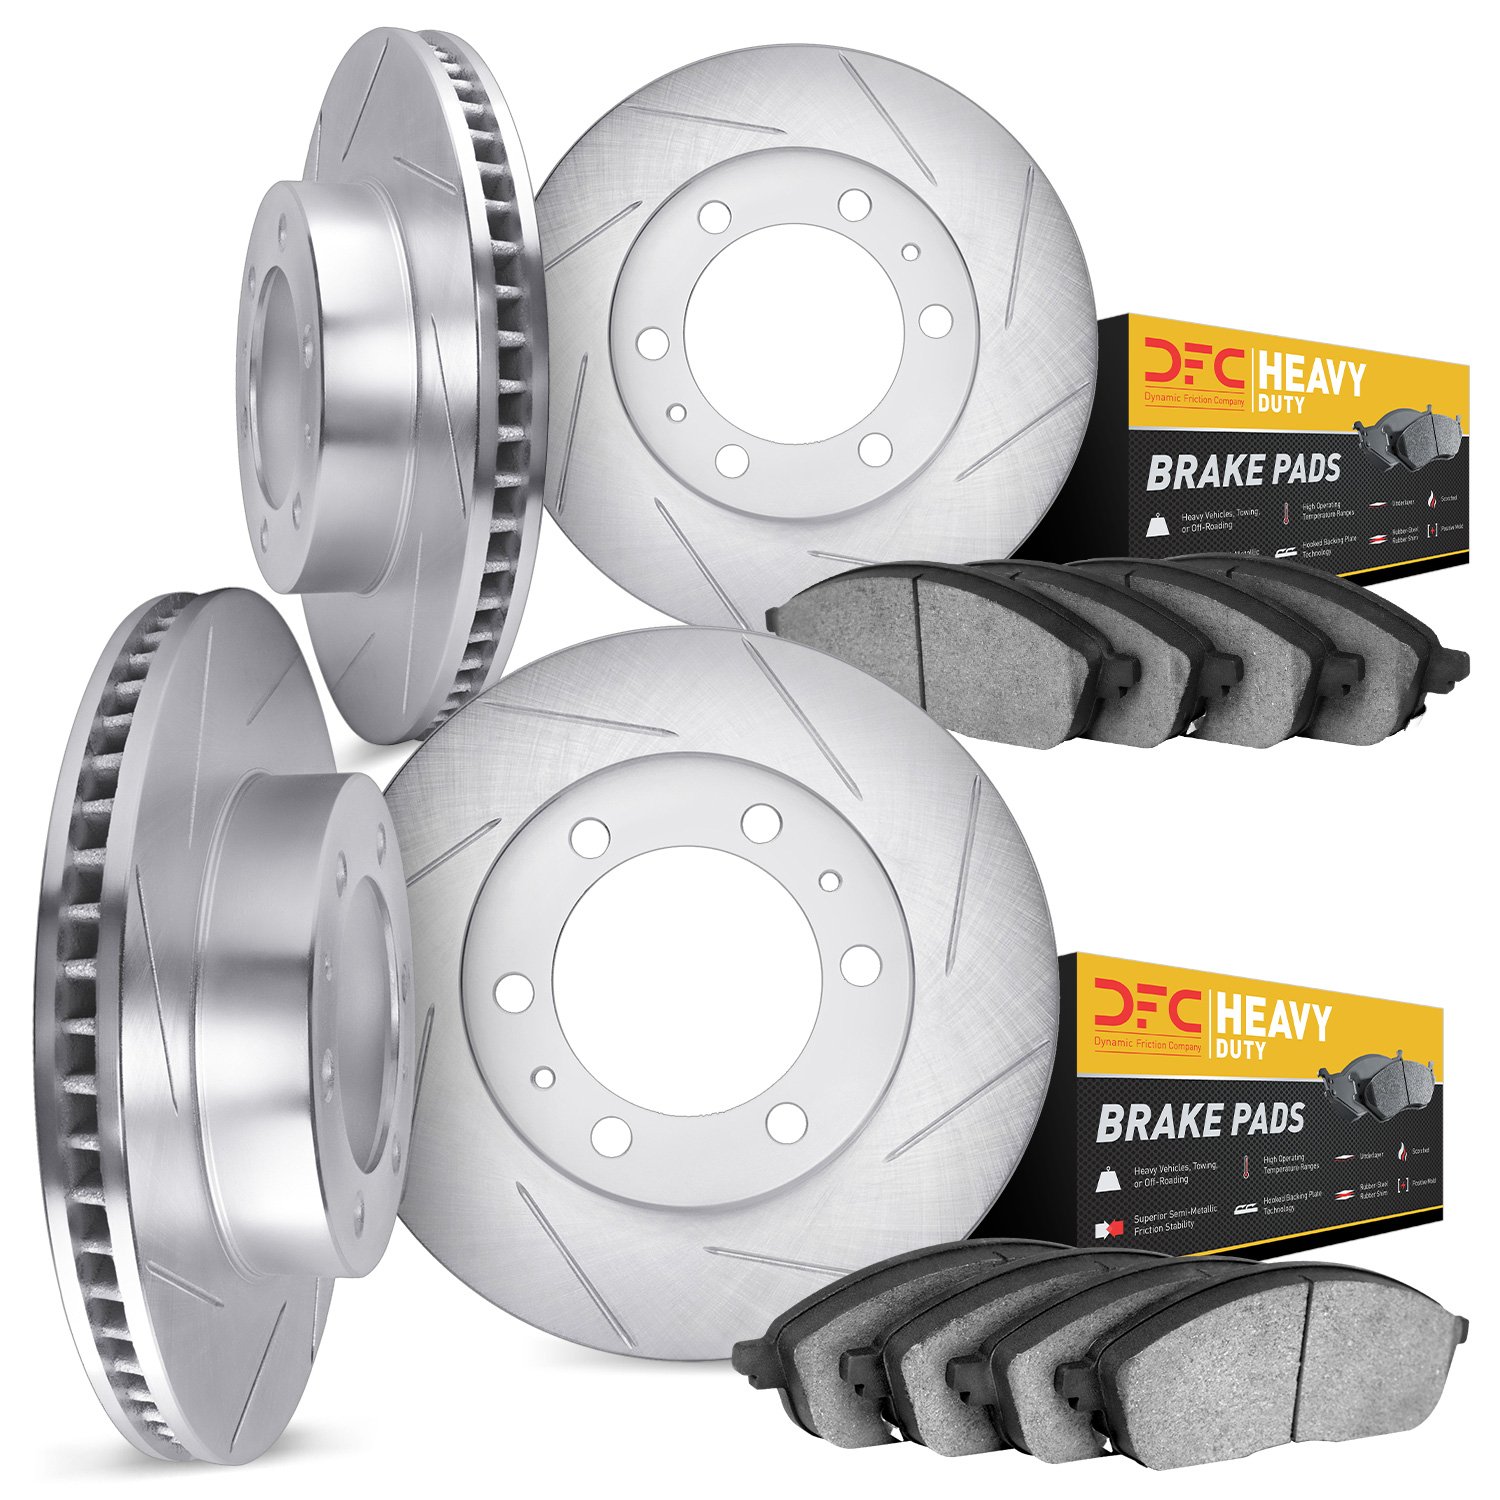 5204-67002 Slotted Brake Rotors w/Heavy-Duty Brake Pads Kits [Silver], Fits Select Infiniti/Nissan, Position: Front and Rear